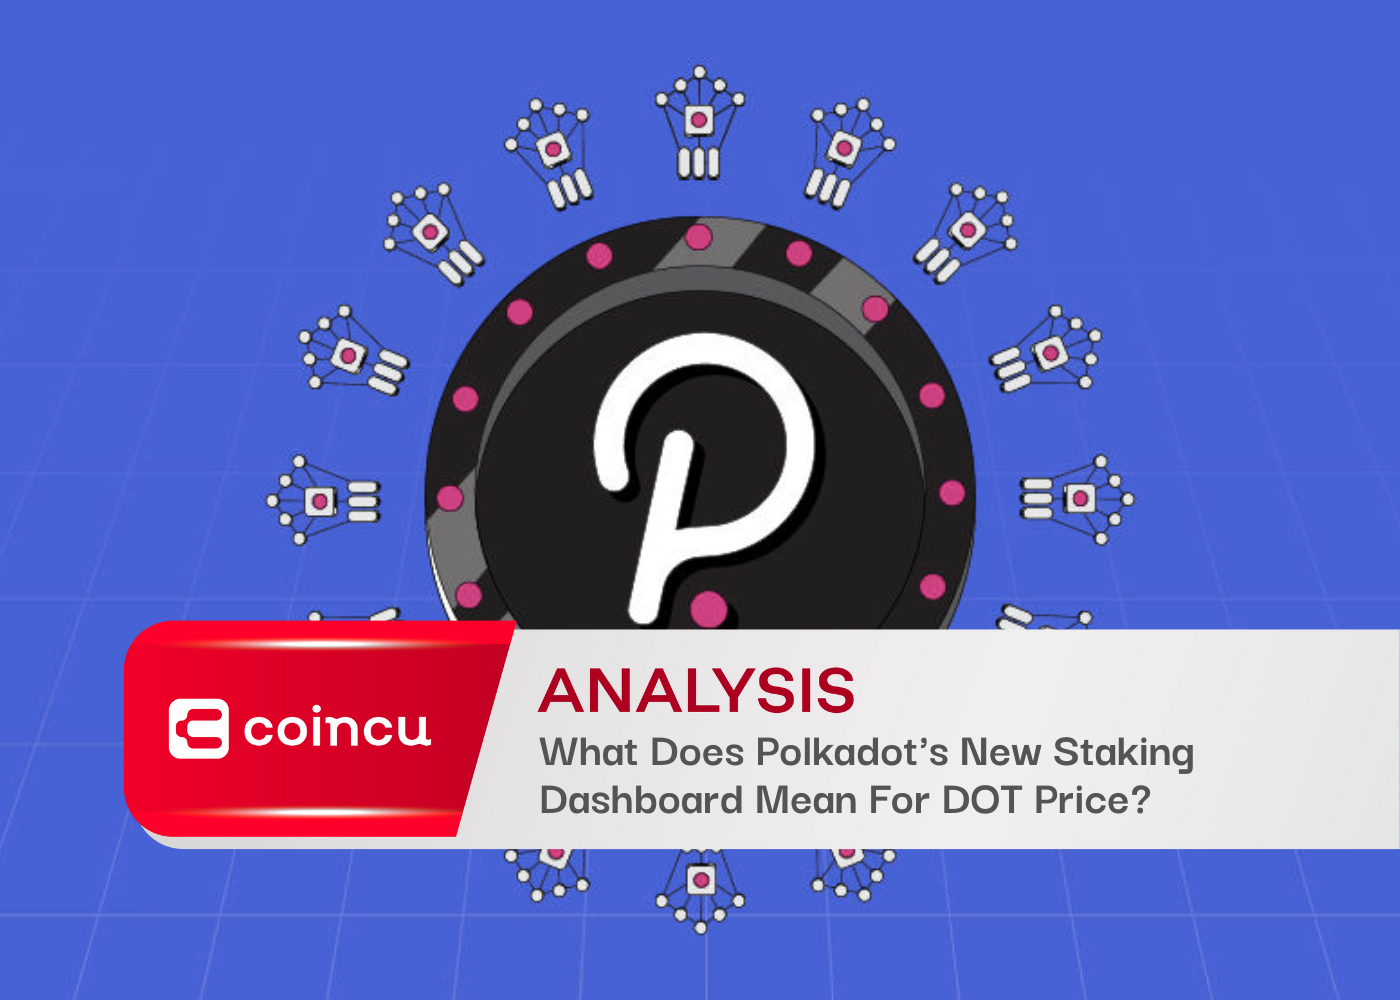 What Does Polkadot's New Staking Dashboard Mean For DOT Price?